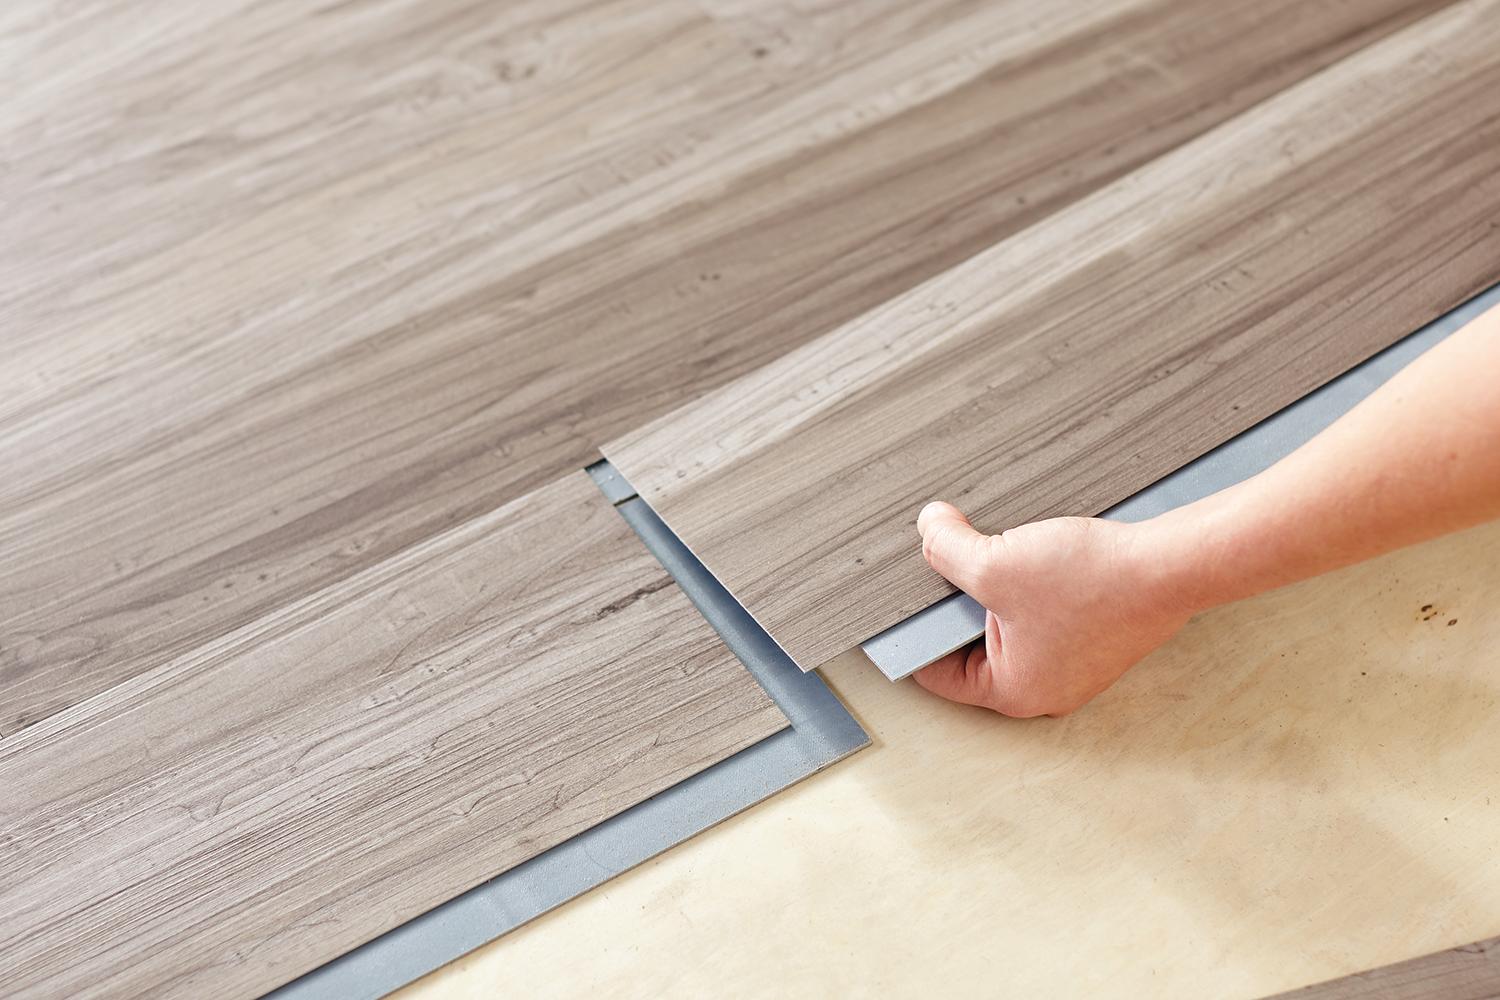 How To Lay Down Vinyl Flooring In Your, When Laying Vinyl Plank Flooring Where Do You Start